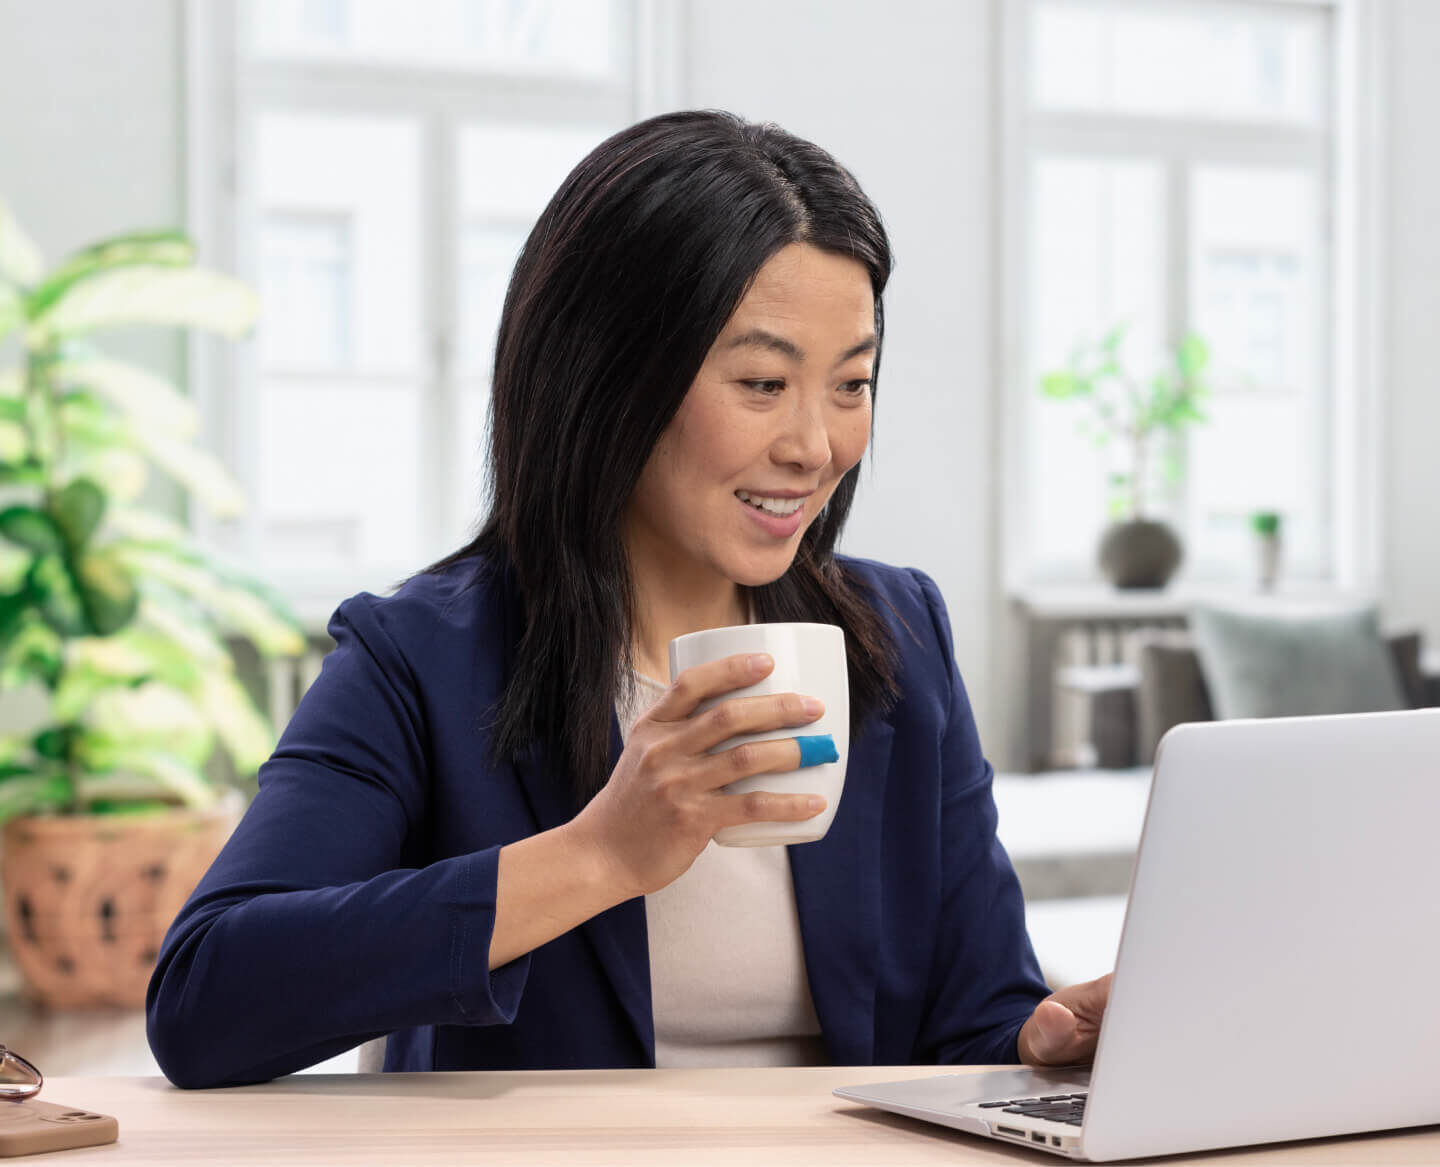 employee smiling, drinking coffee, and working on her laptop